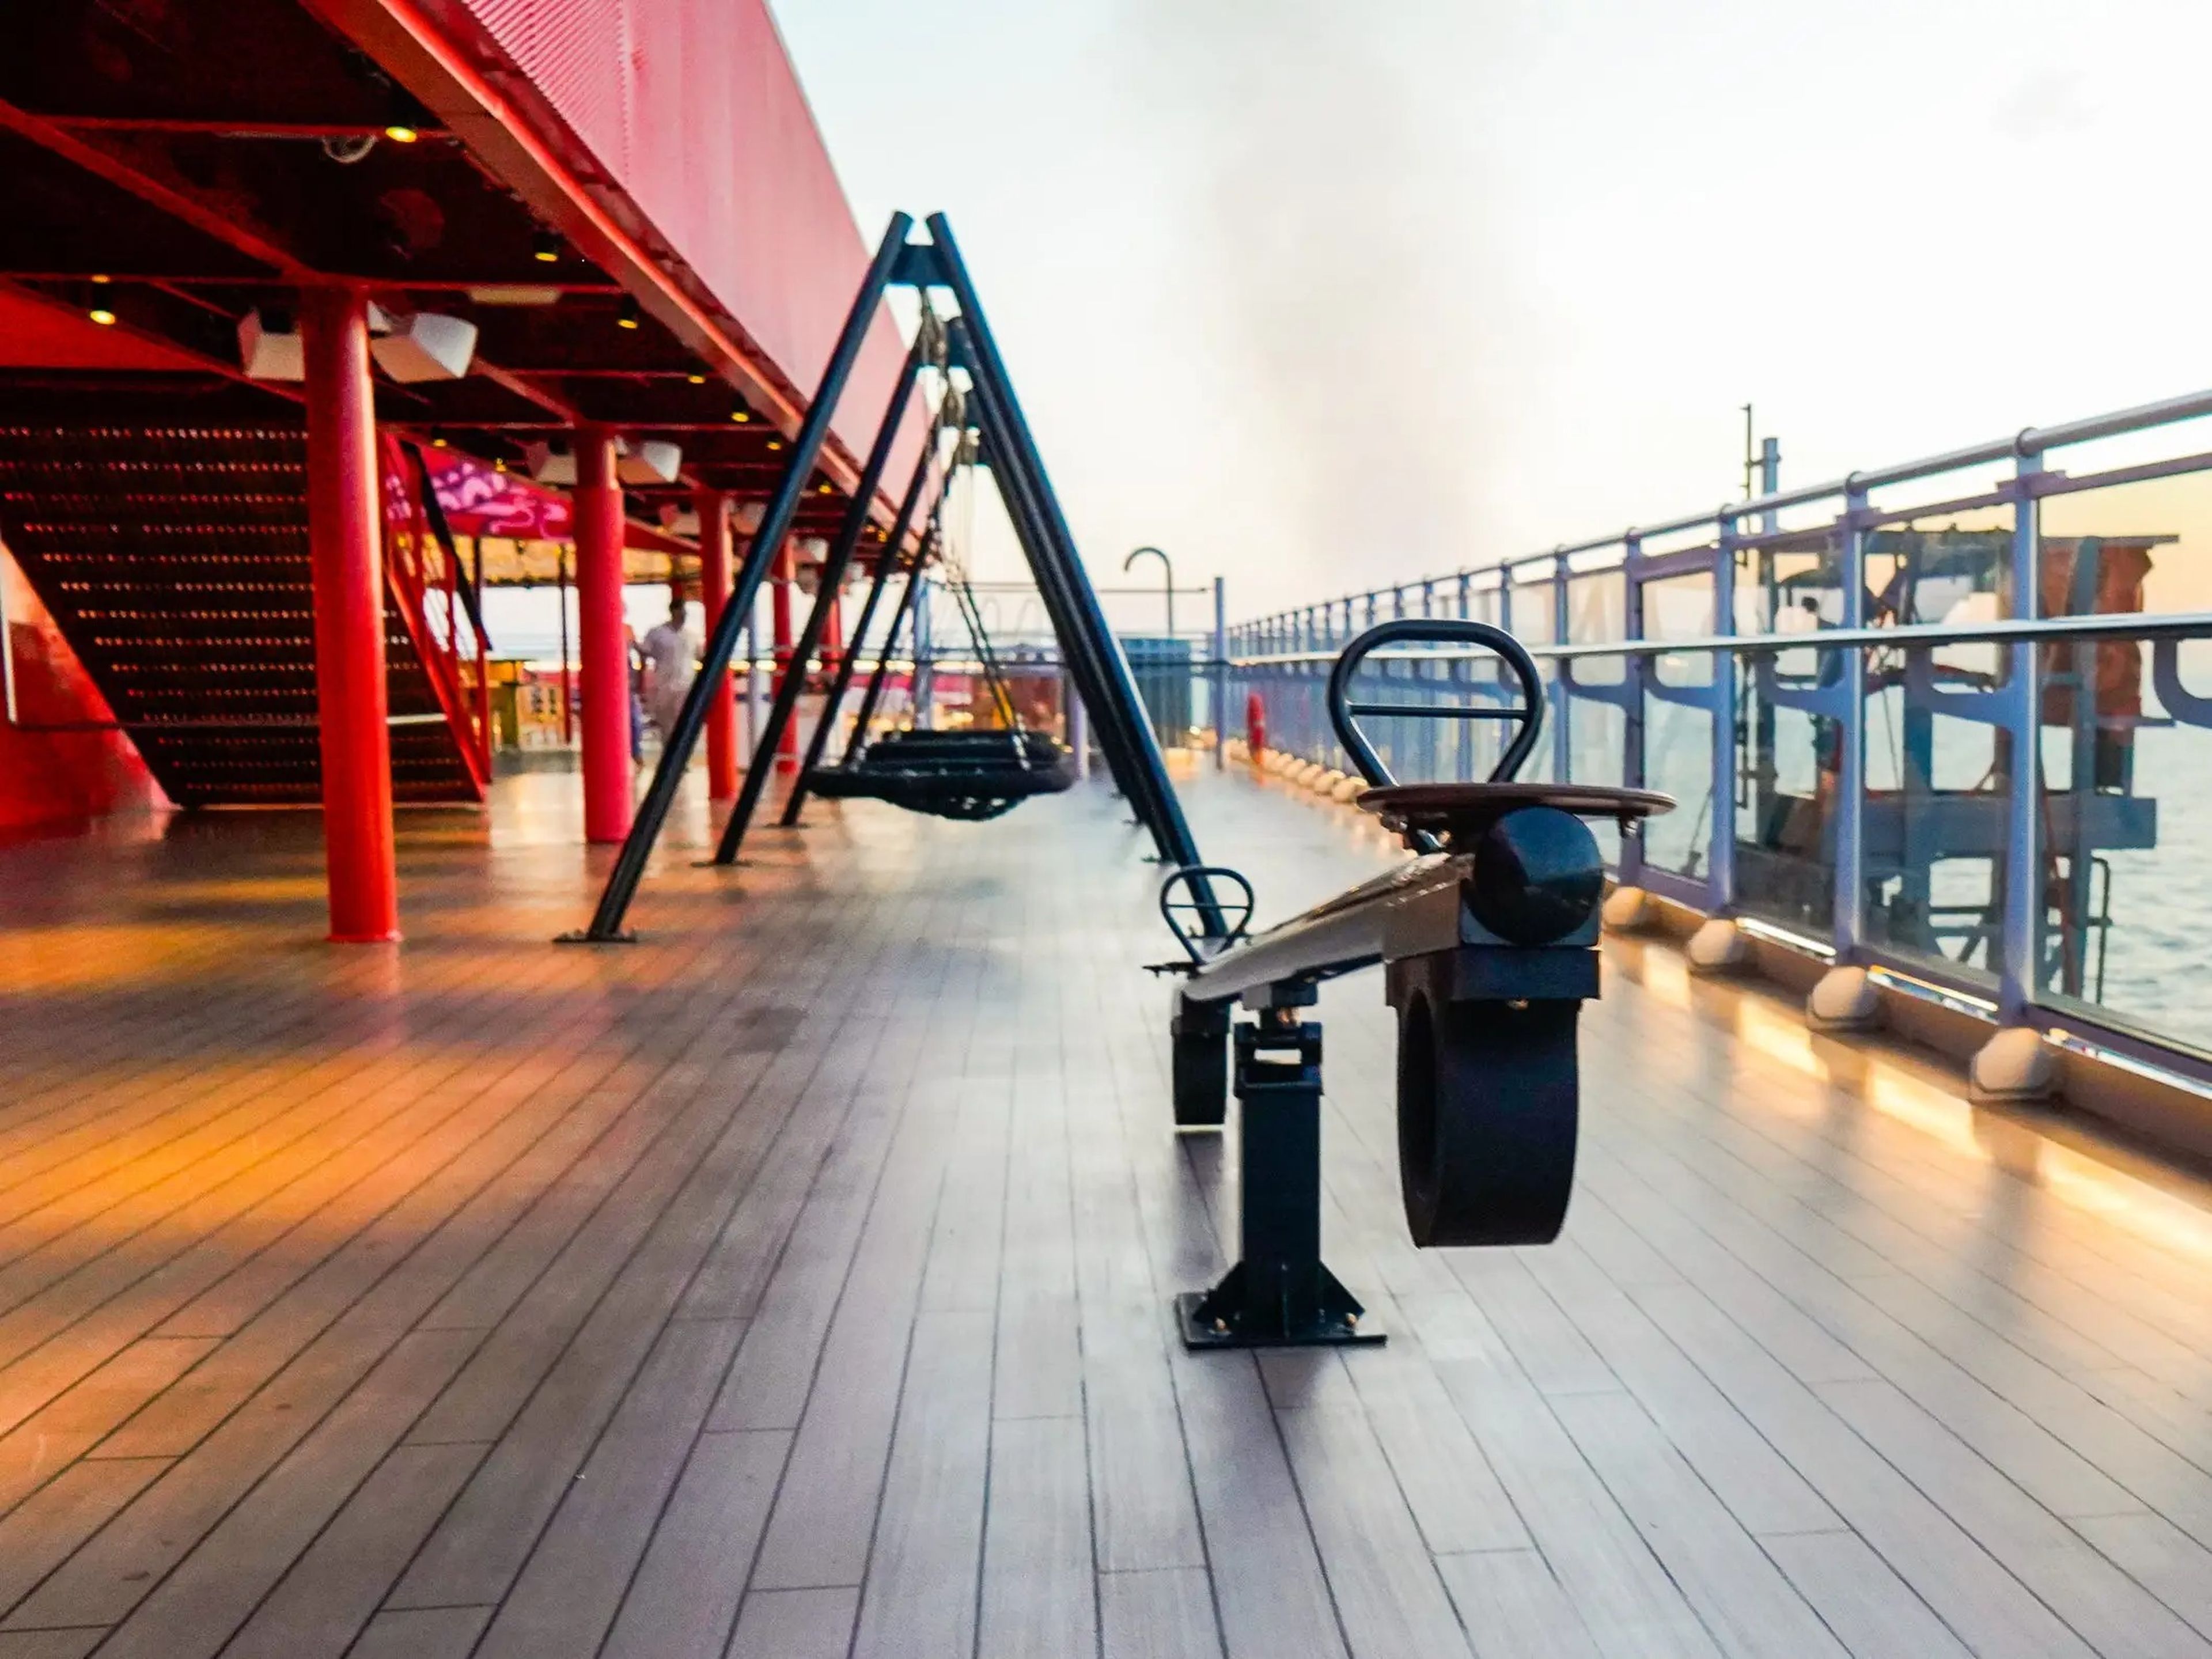 An empty deck on a cruise ship with a black seesaw, swings, and  a red staircase